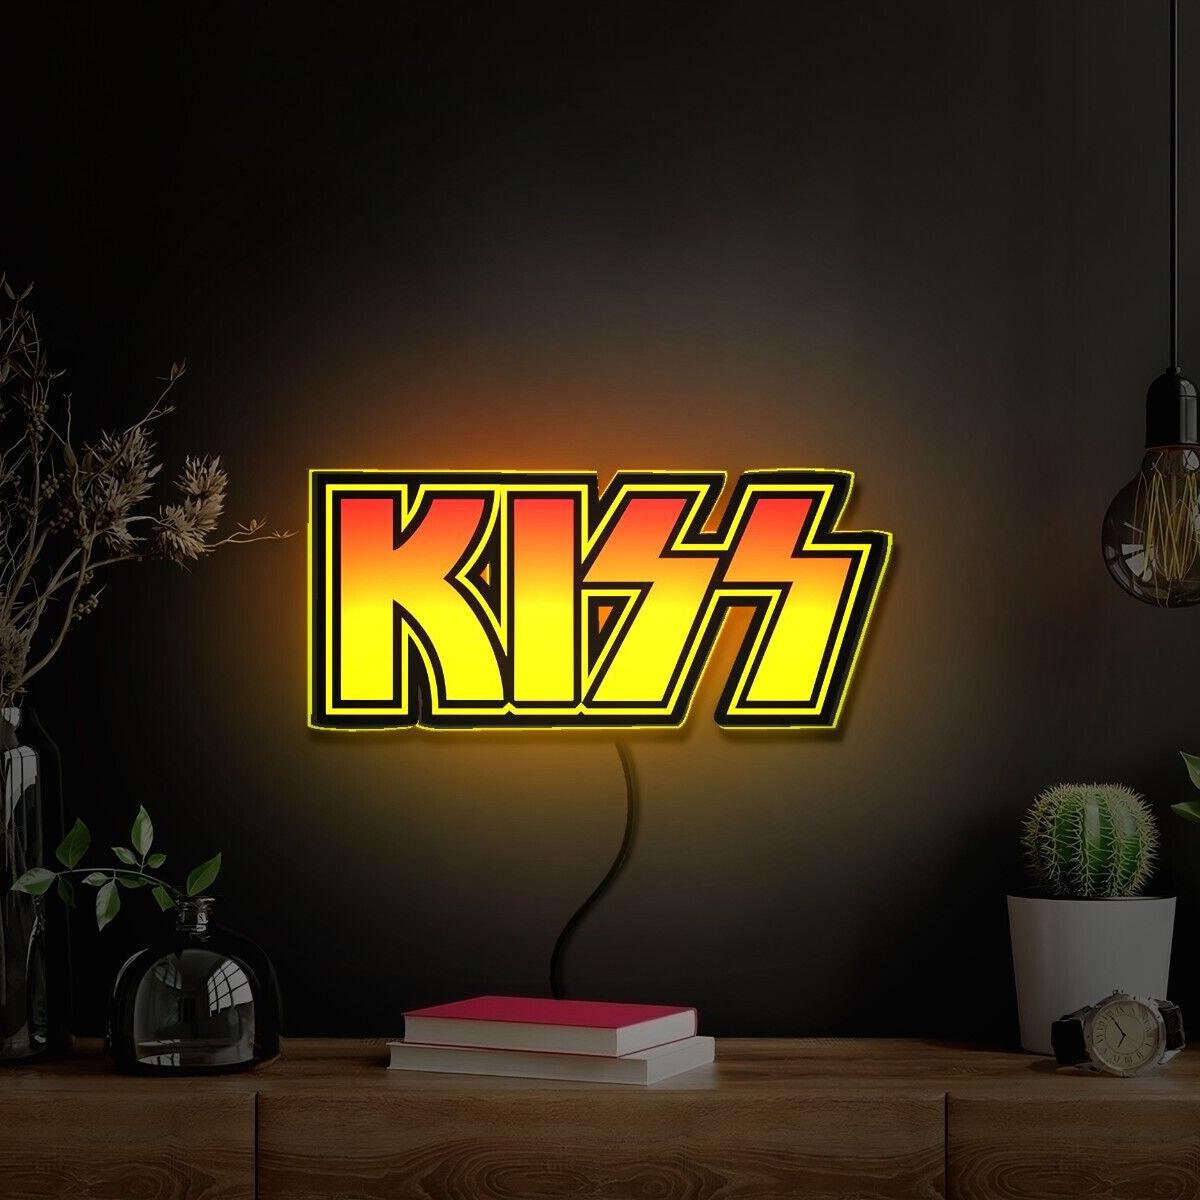 KISS Logo LED Lightbox | Rock the Night with Legendary Band | Powered by USB